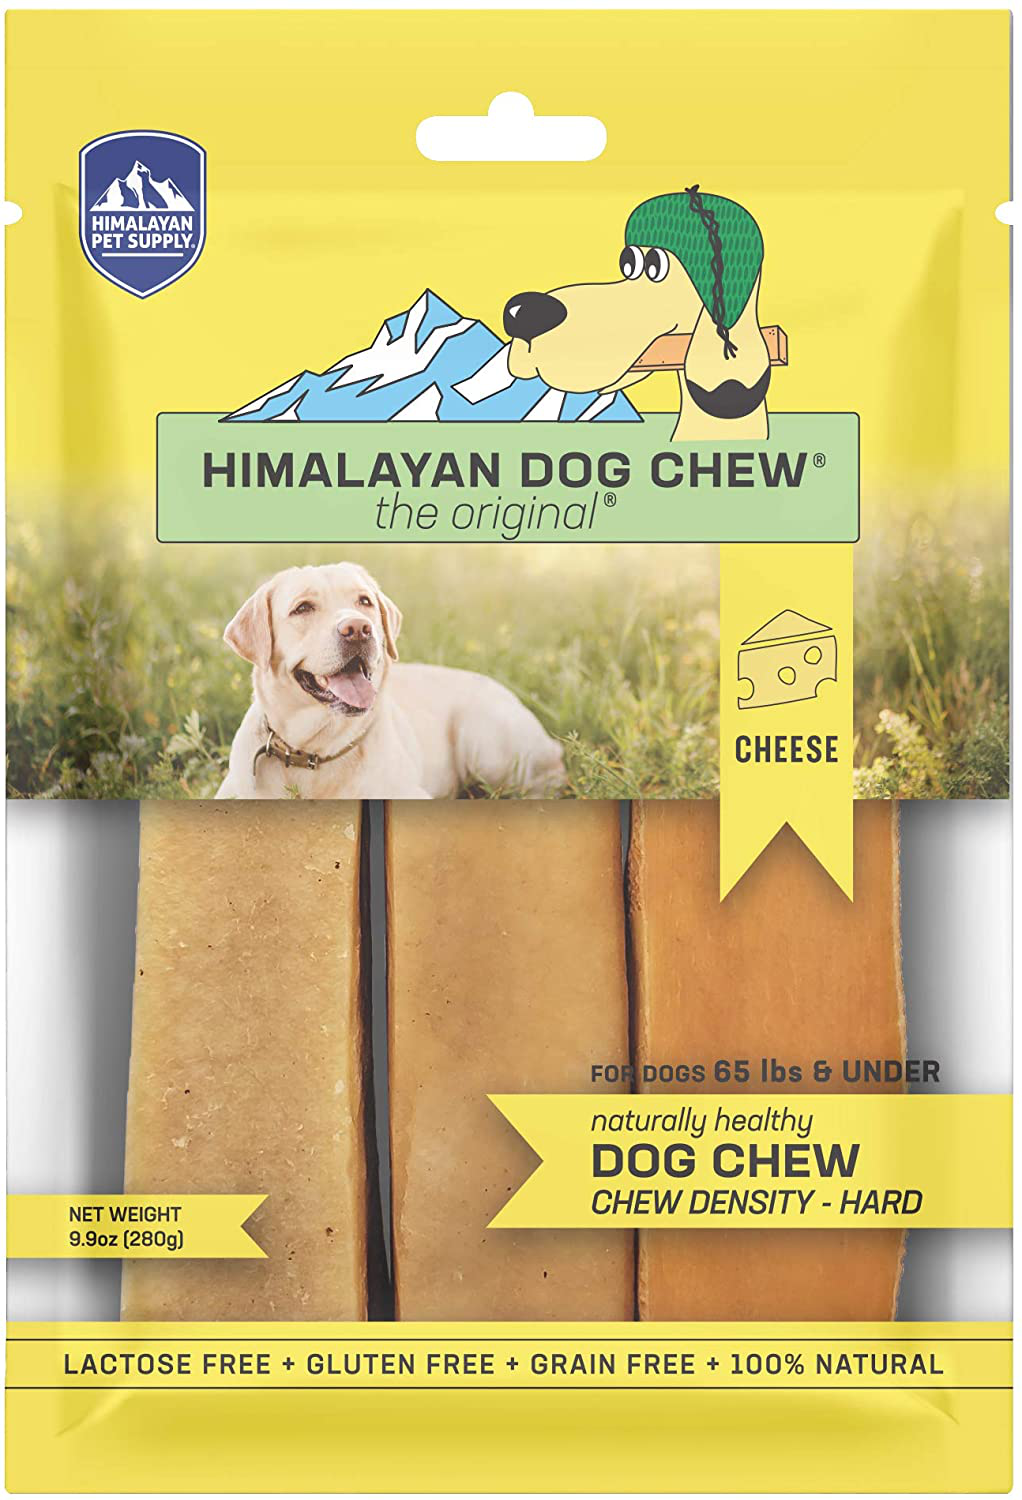 Himalayan Yak Cheese Dog Chews | the Original Himalayan Hard Cheese Dog Chew | 100% Natural, Healthy & Safe | No Lactose, Gluten or Grains | MIXED SIZES | for Dogs 65 Lbs & Smaller Animals & Pet Supplies > Pet Supplies > Dog Supplies > Dog Treats Himalayan Dog Chew 3 Count (Pack of 1)  